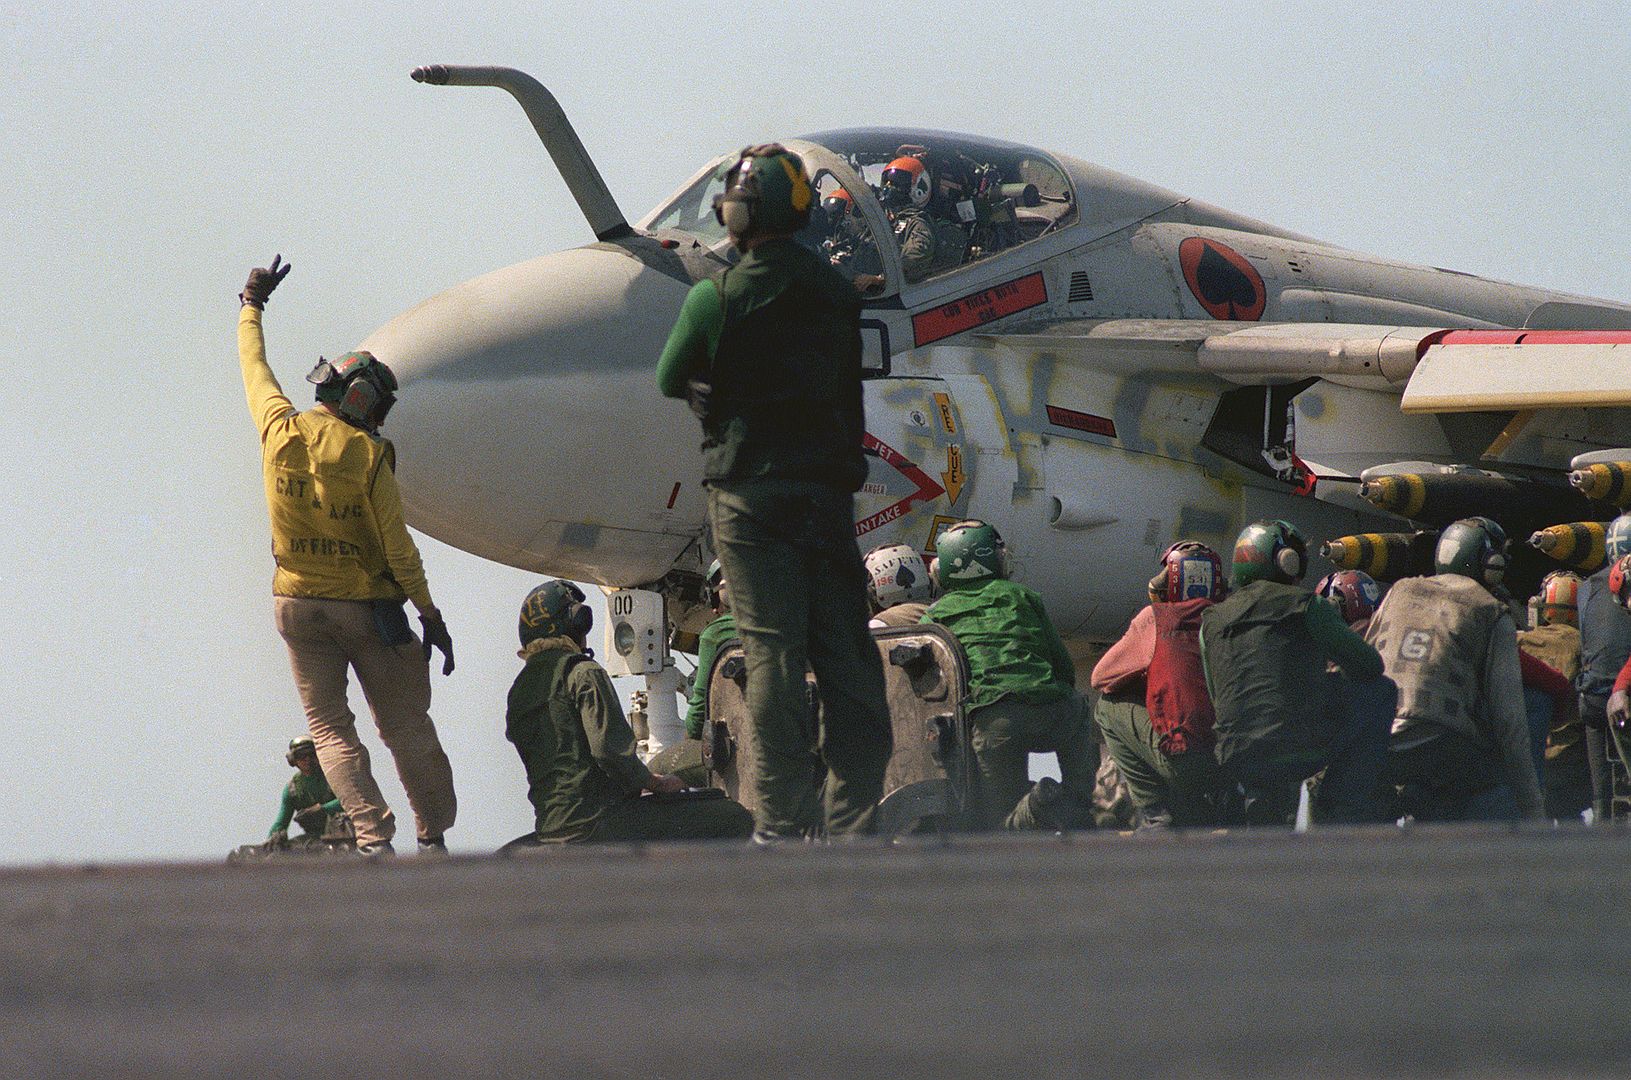 An A 6E Intruder Attack Aircraft From Medium Attack Squadron 196 Prepares For Launch Aboard The Aircraft Carrier USS CORAL SEA 